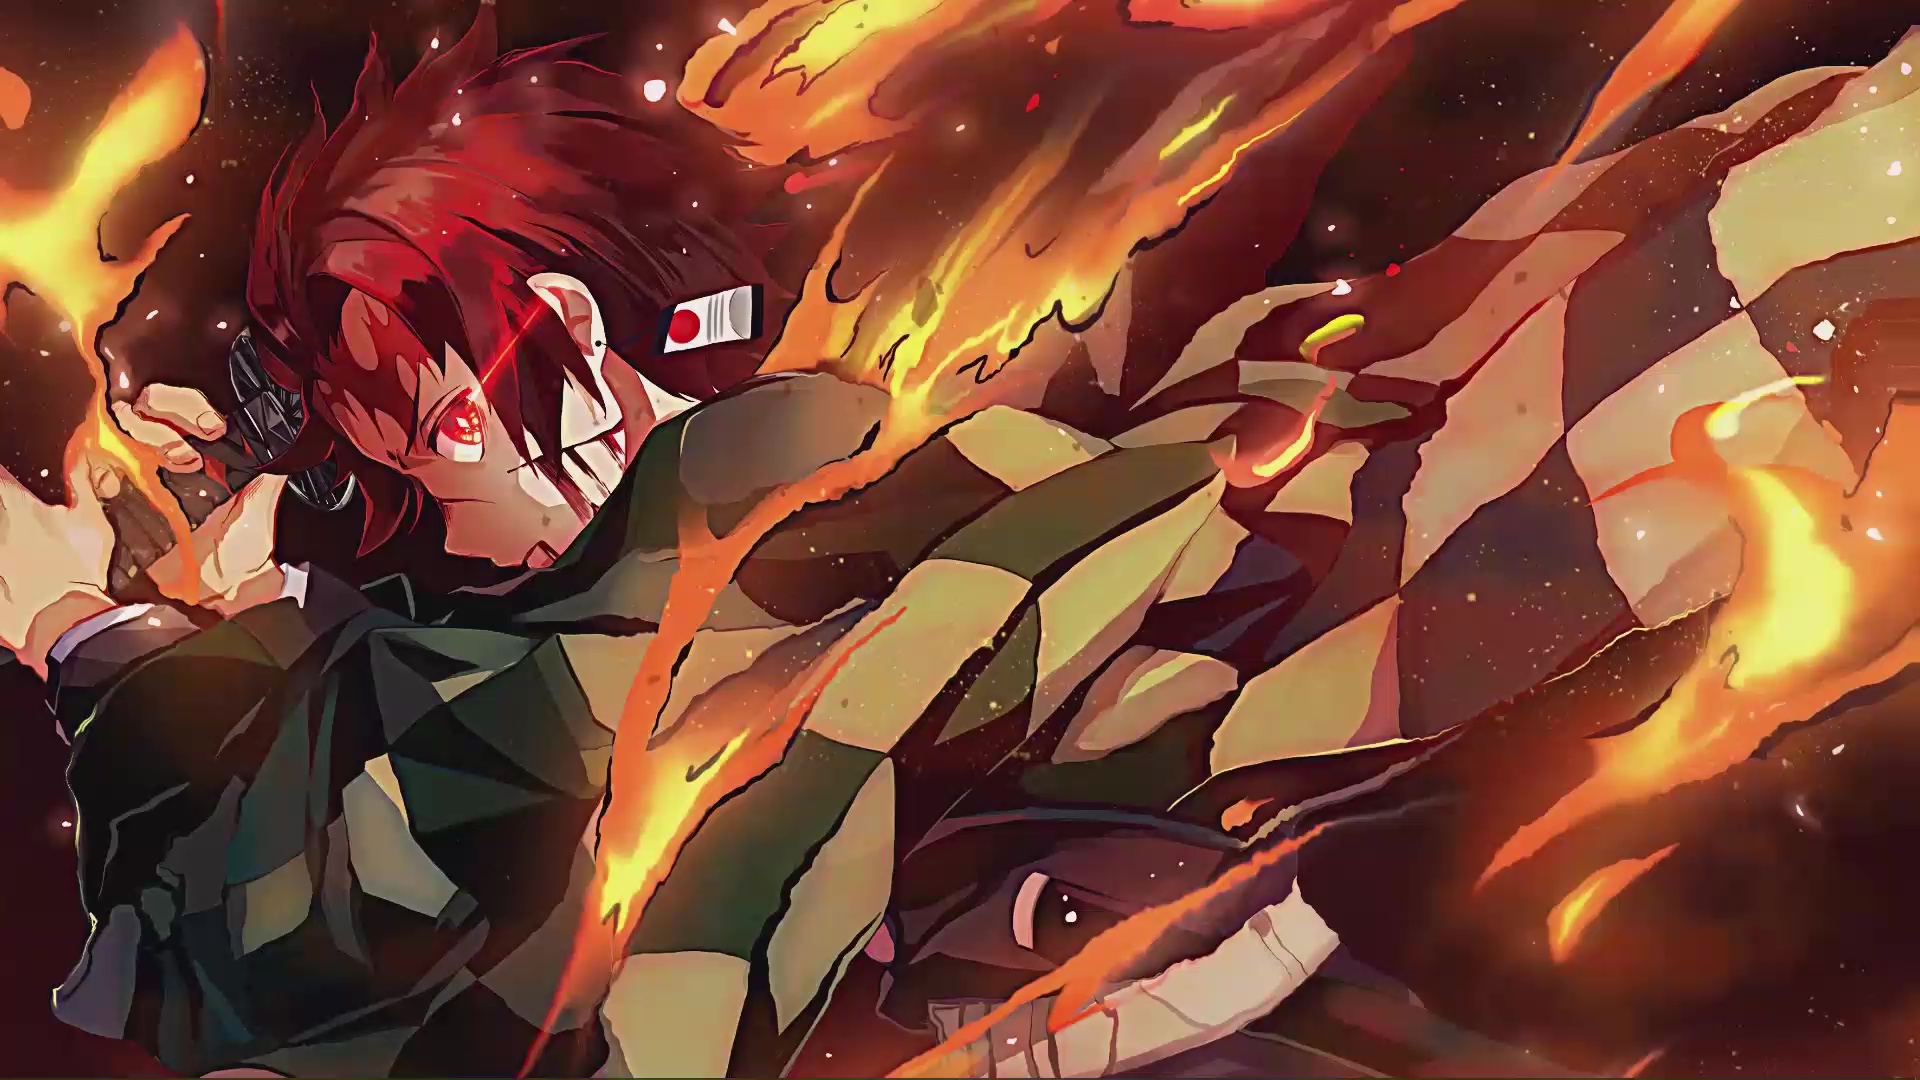 Tanjiro Dance Of The Fire God Live Wallpapers.